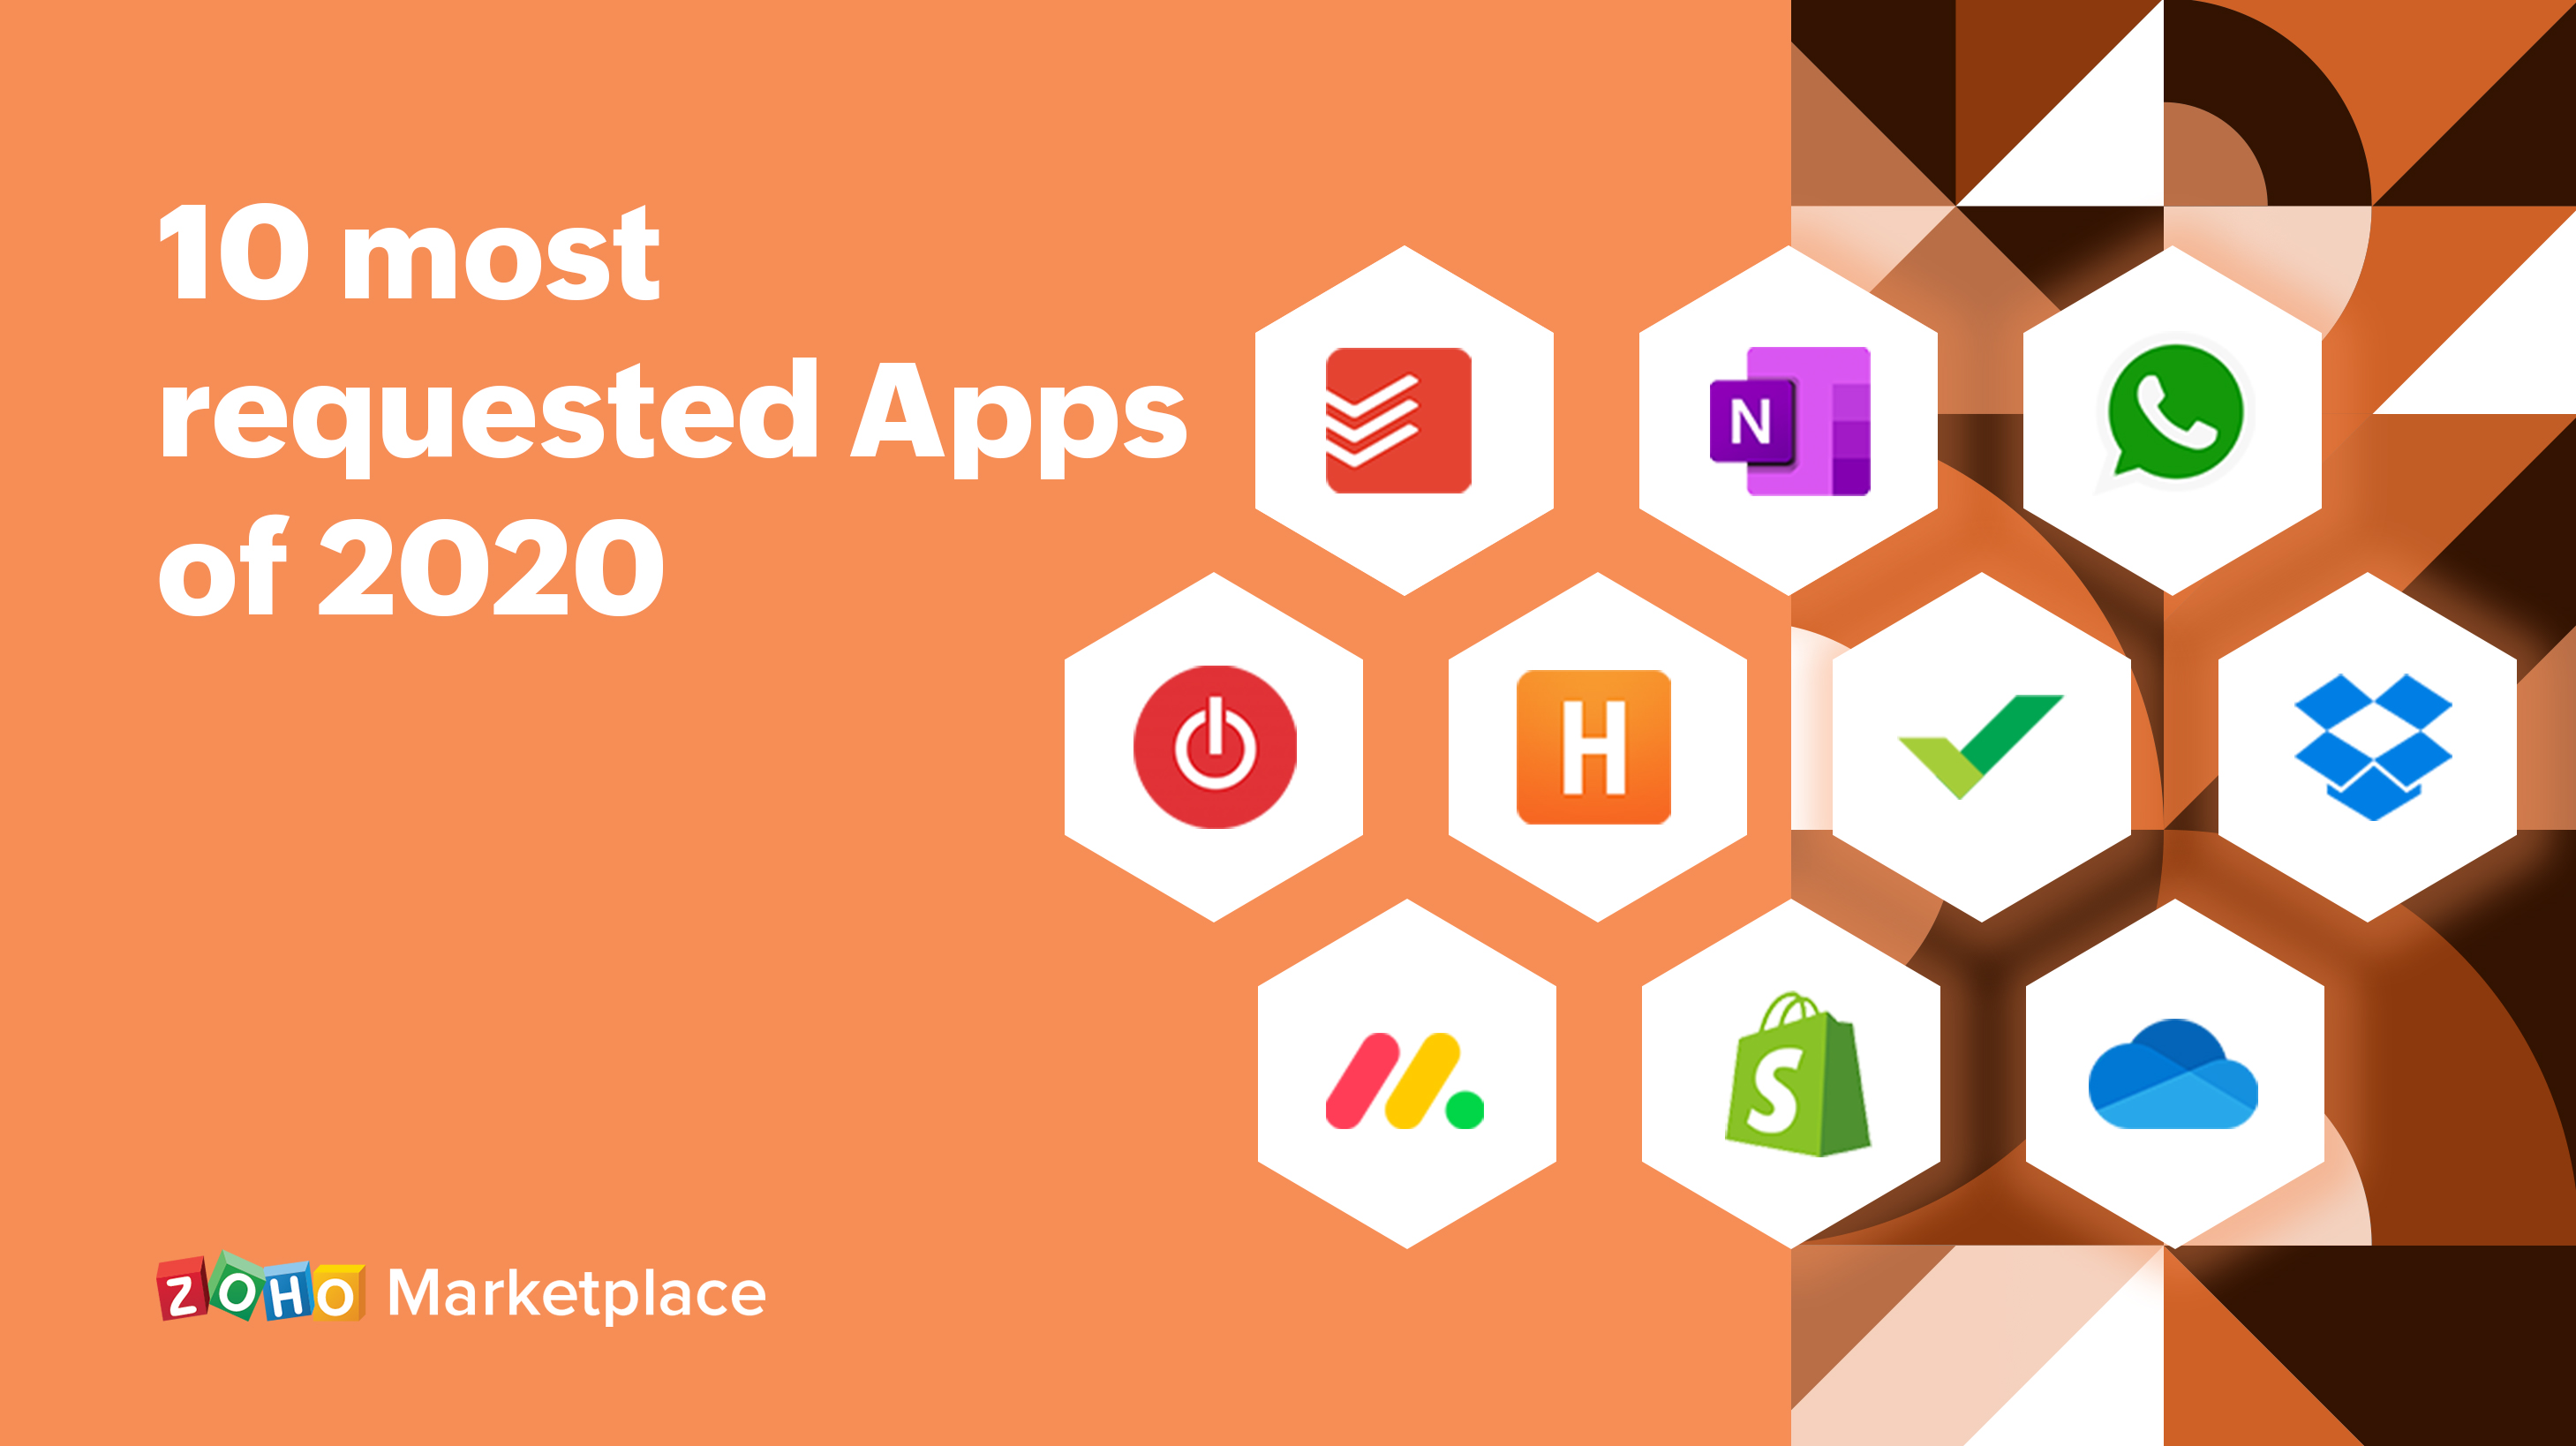 10 most requested apps of 2020